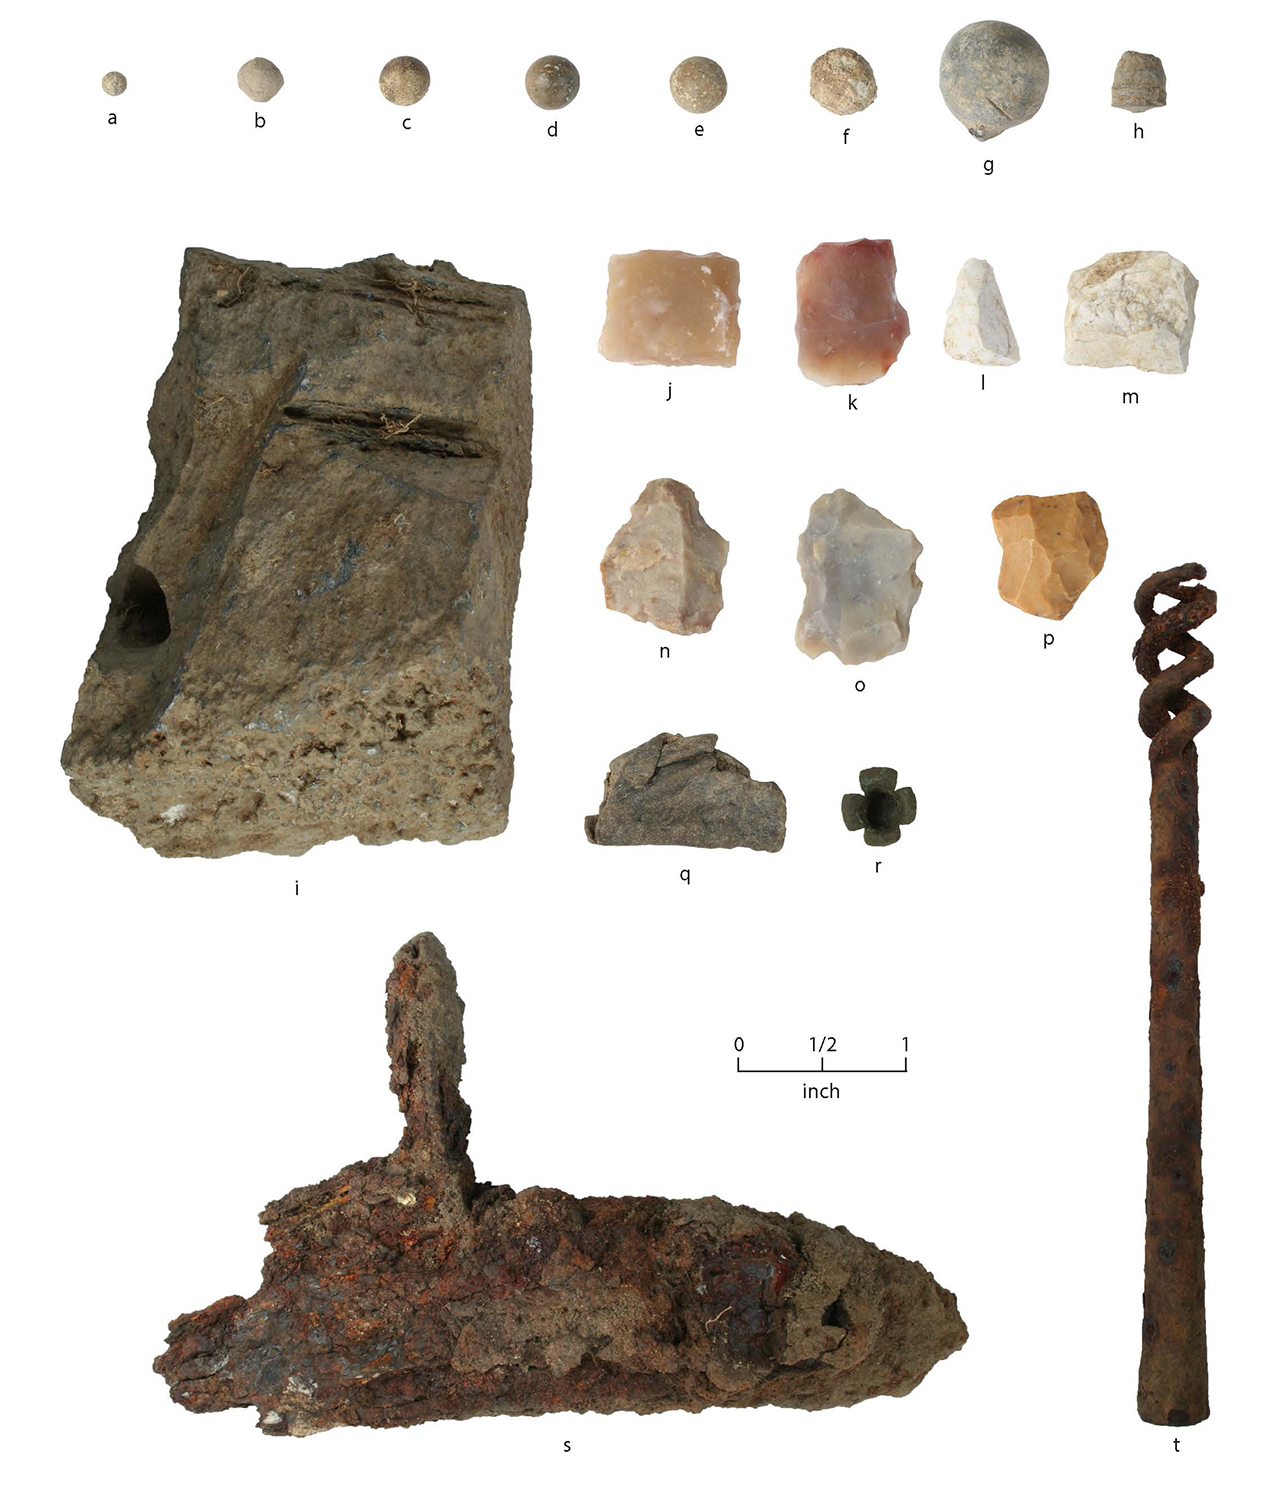 Photograph of many historic artifacts neatly arranged in rows on a white background with scale bar; some items are tiny, others larger.